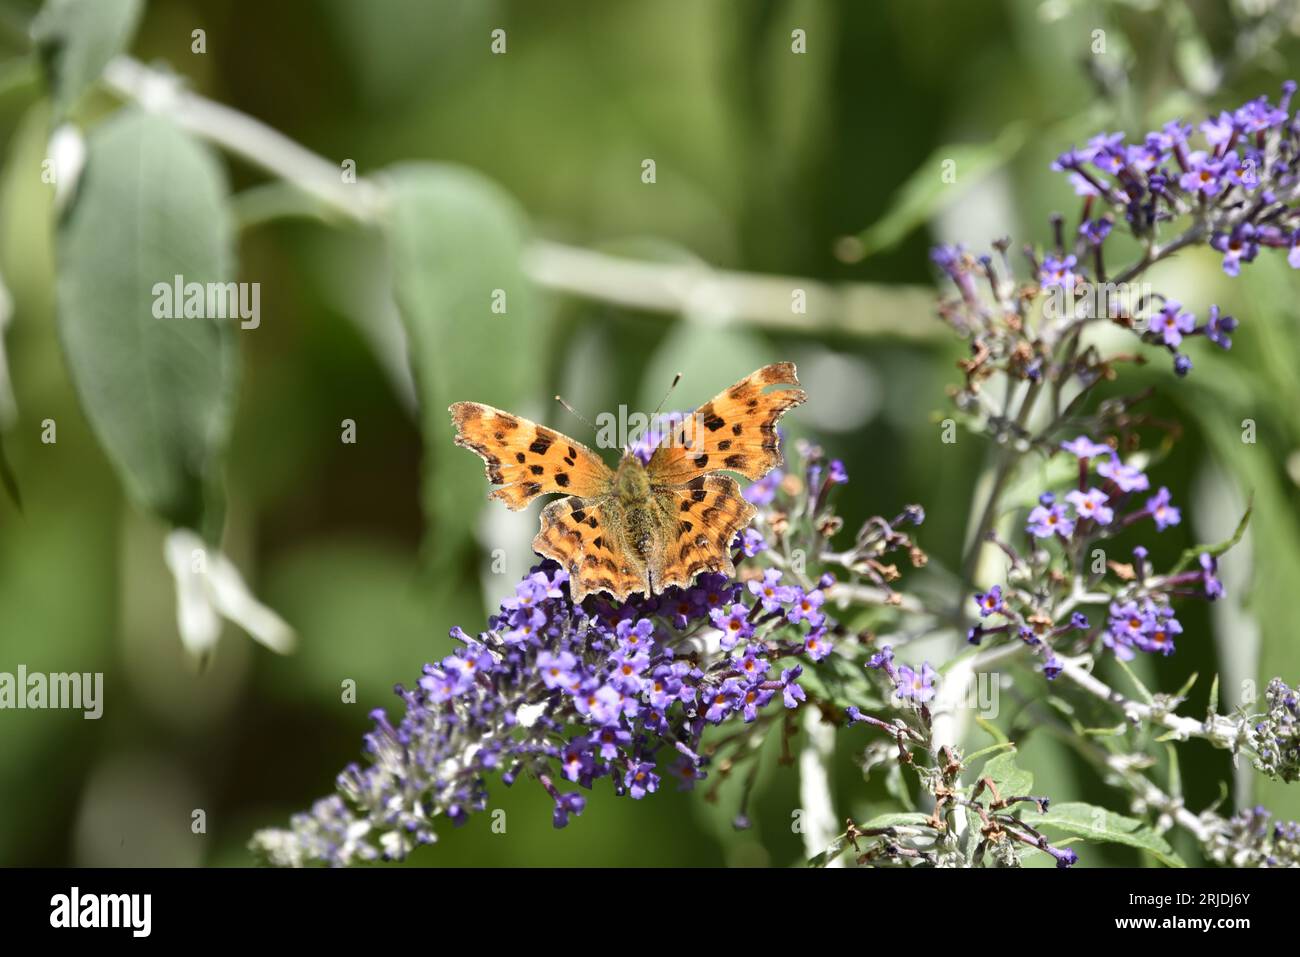 Comma Butterfly (Polygonia c-album) with Wings Open, Facing Top of Image, On Top of a Purple Buddleia Plant, scattato ad agosto in Inghilterra, Regno Unito Foto Stock